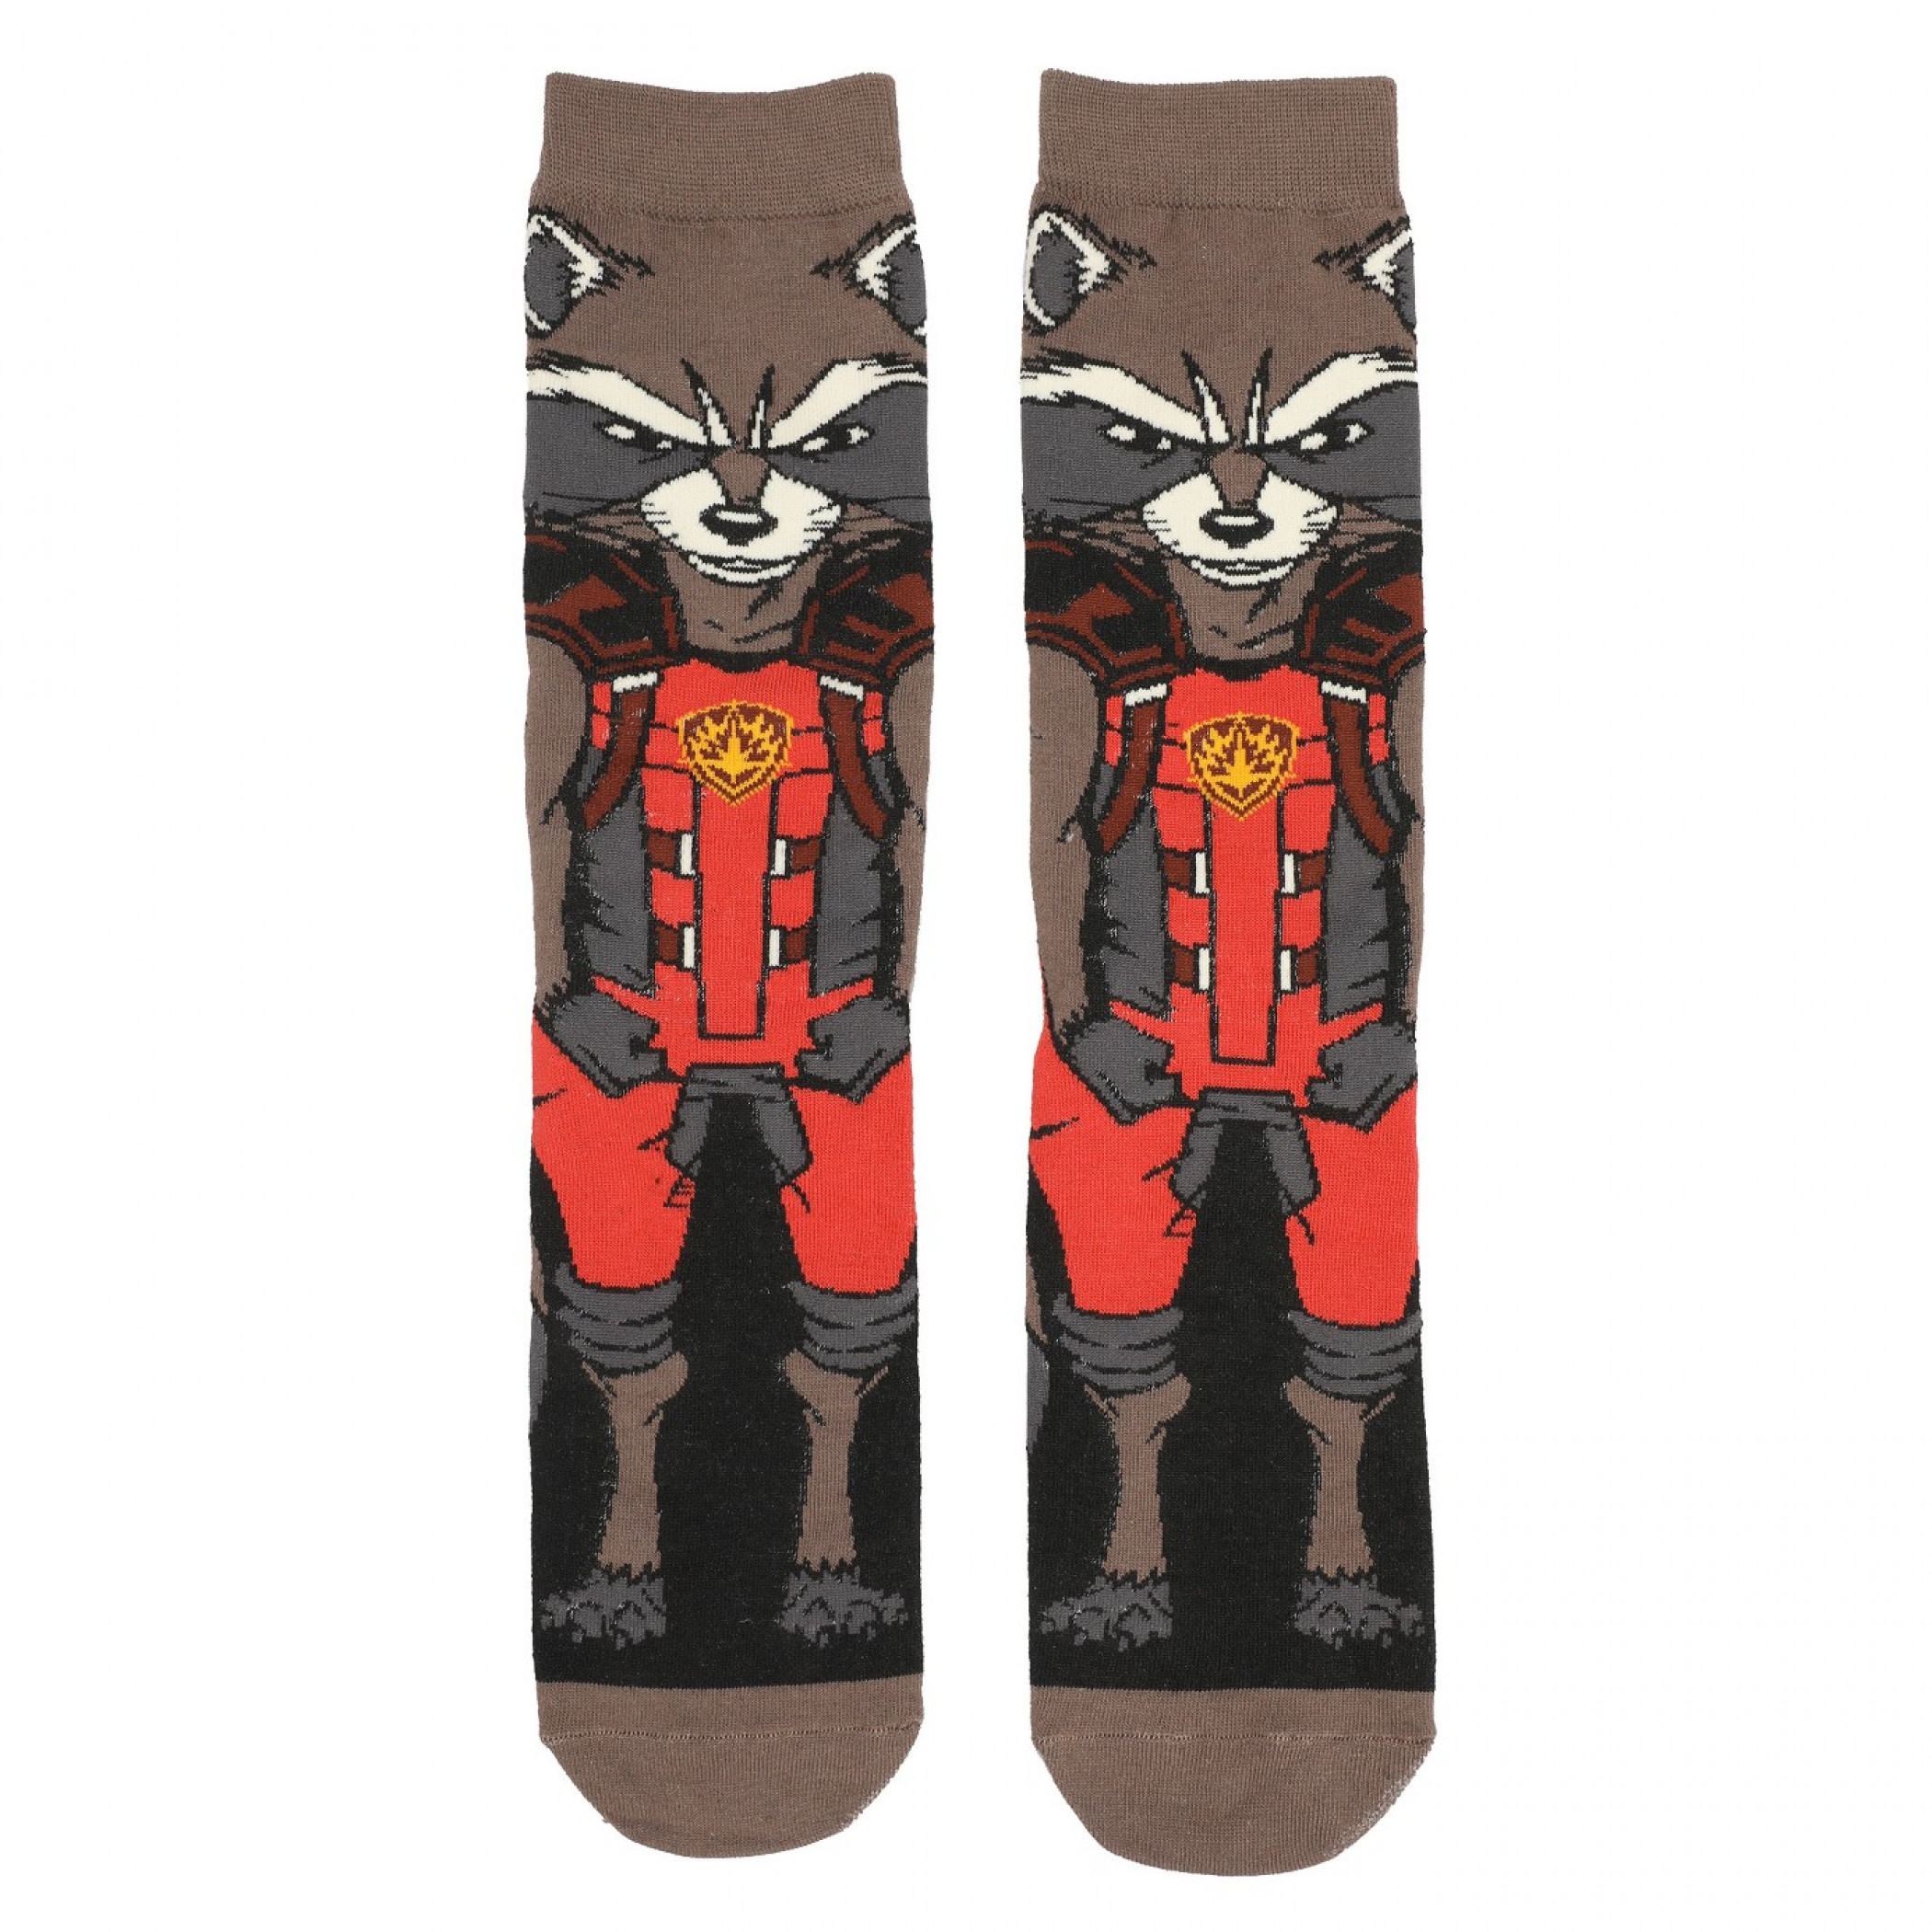 Guardians of The Galaxy 360 Character 3-Pair Pack of Crew Socks